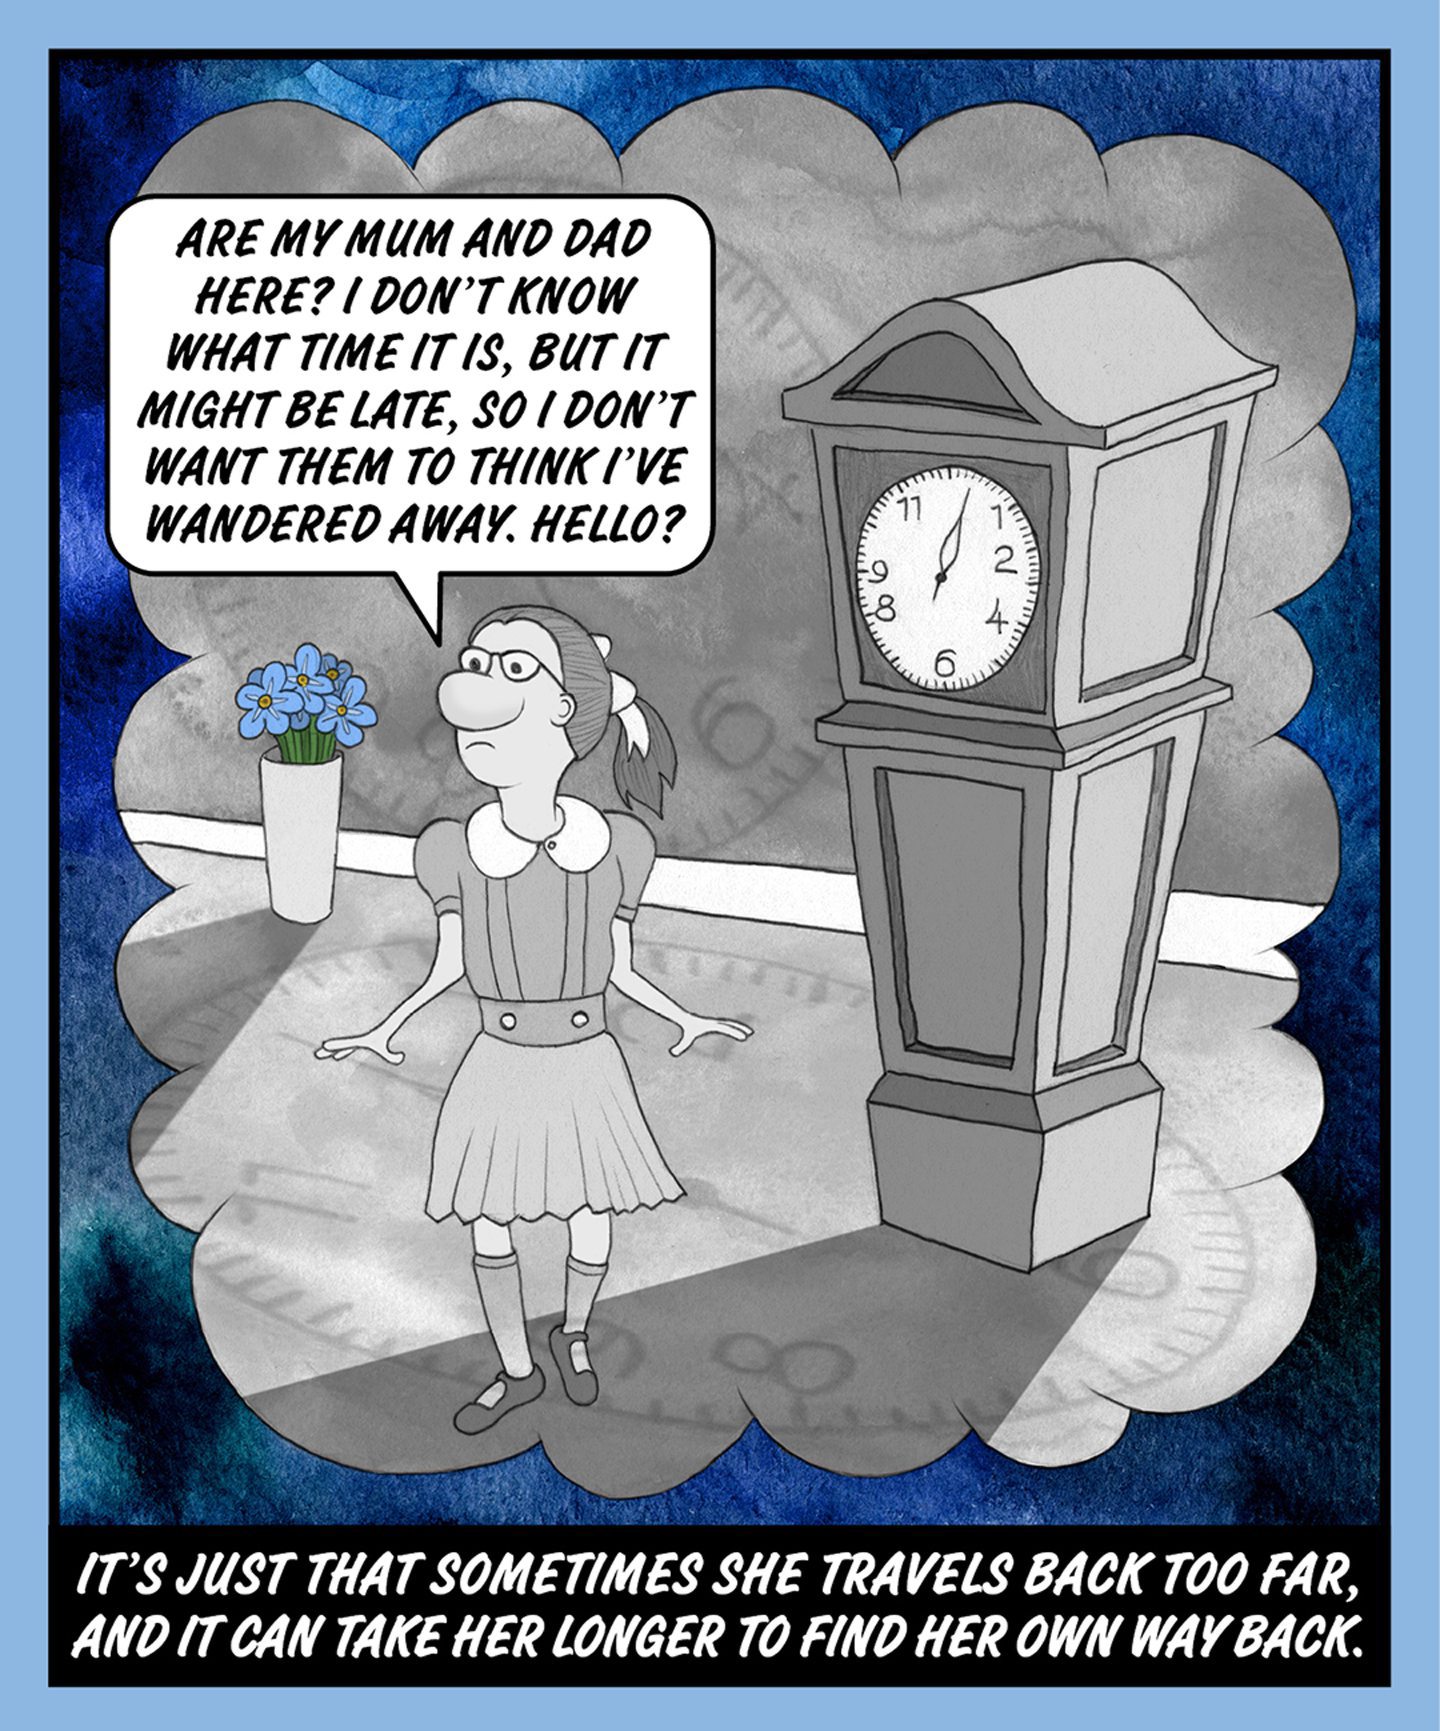 A black and white comic illustration of a young girl standing beside a clock. The speech bubble from the girl reads: ARE MY MUM AND DAD HERE? I DON'T KNOW WHAT TIME IT IS, BUT IT MIGHT BE LATE, SO I DON'T WANT THEM TO THINK I'VE WANDERED AWAY. HELLO? 
